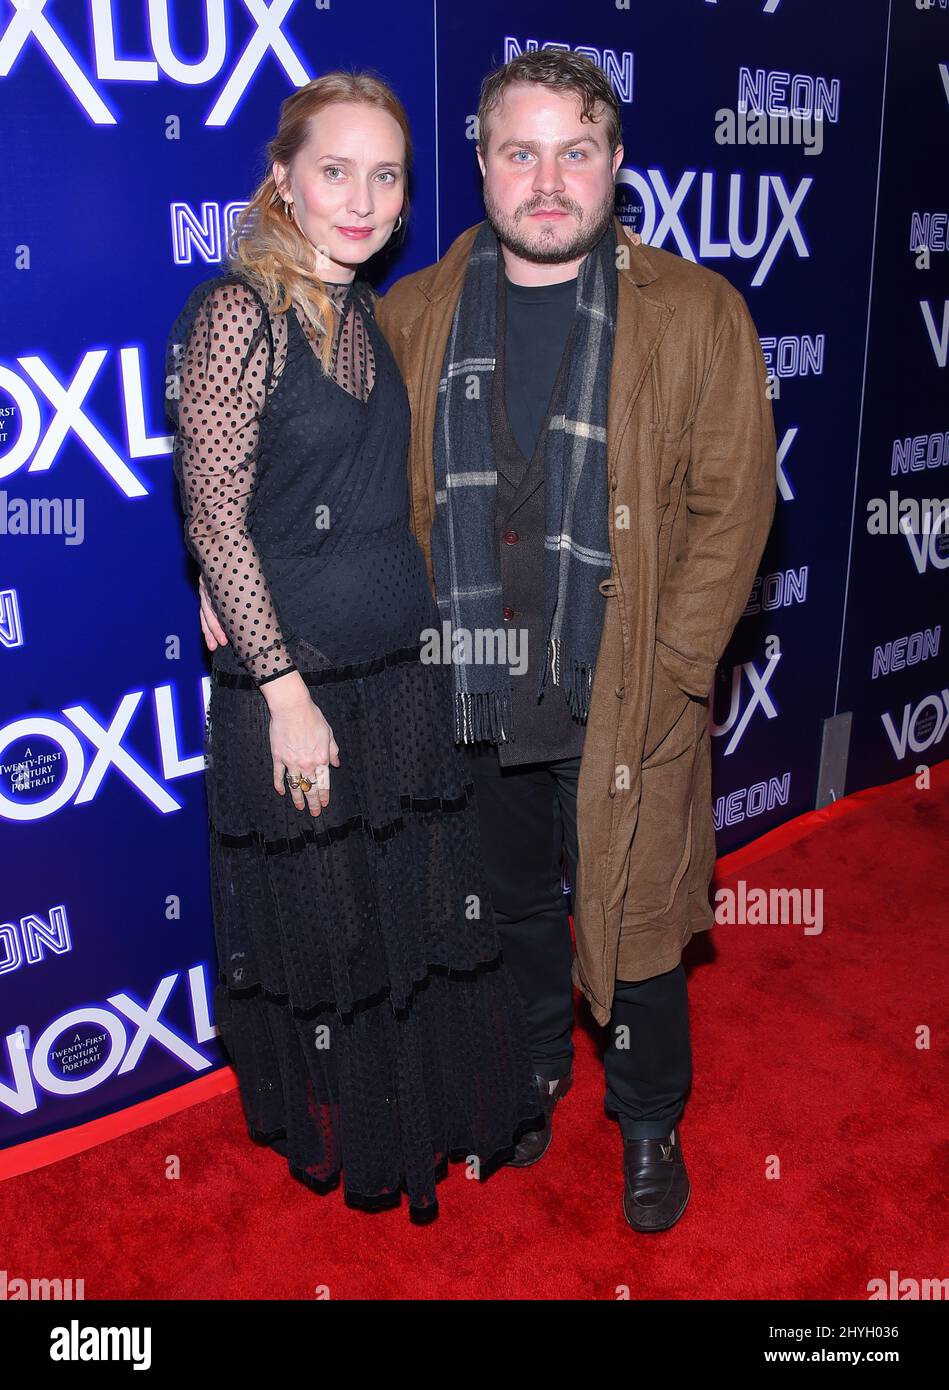 Mona Lerche and Brady Corbet at the premiere of 'Vox Lux'' held at the ArcLight Cinemas Hollywood Stock Photo